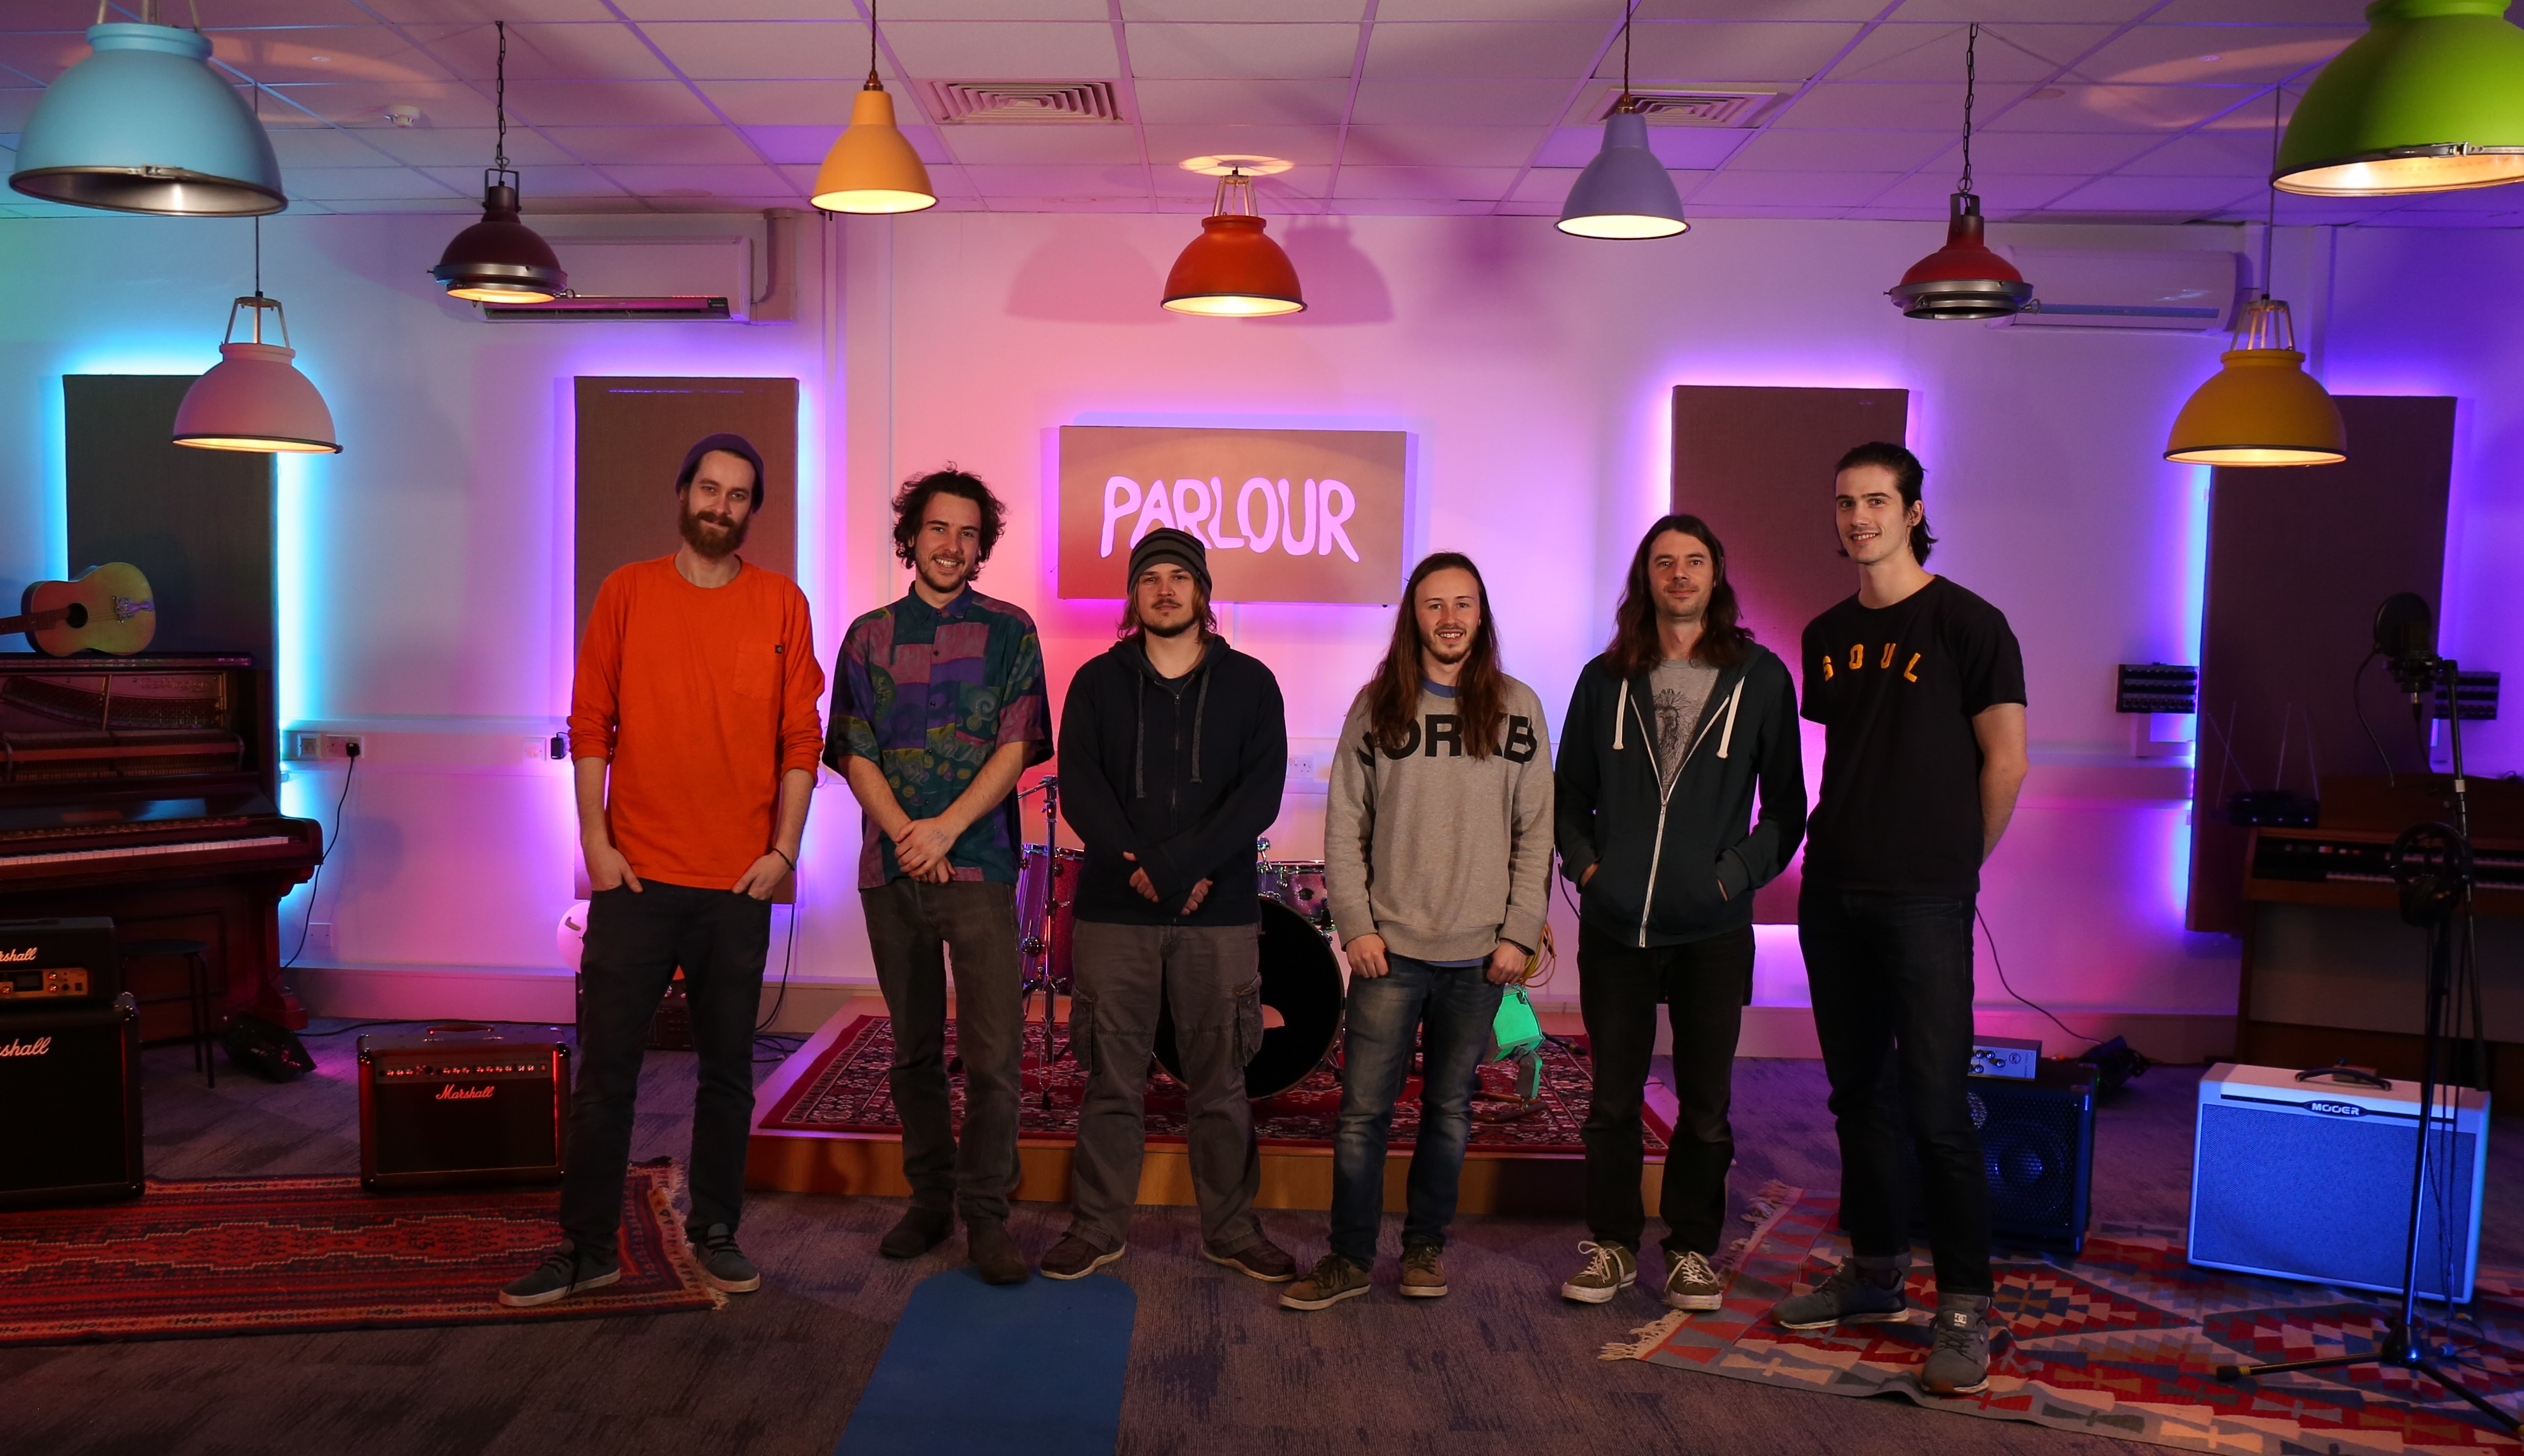 RouteNote Sessions ranked as one of the top live sessions in the UK